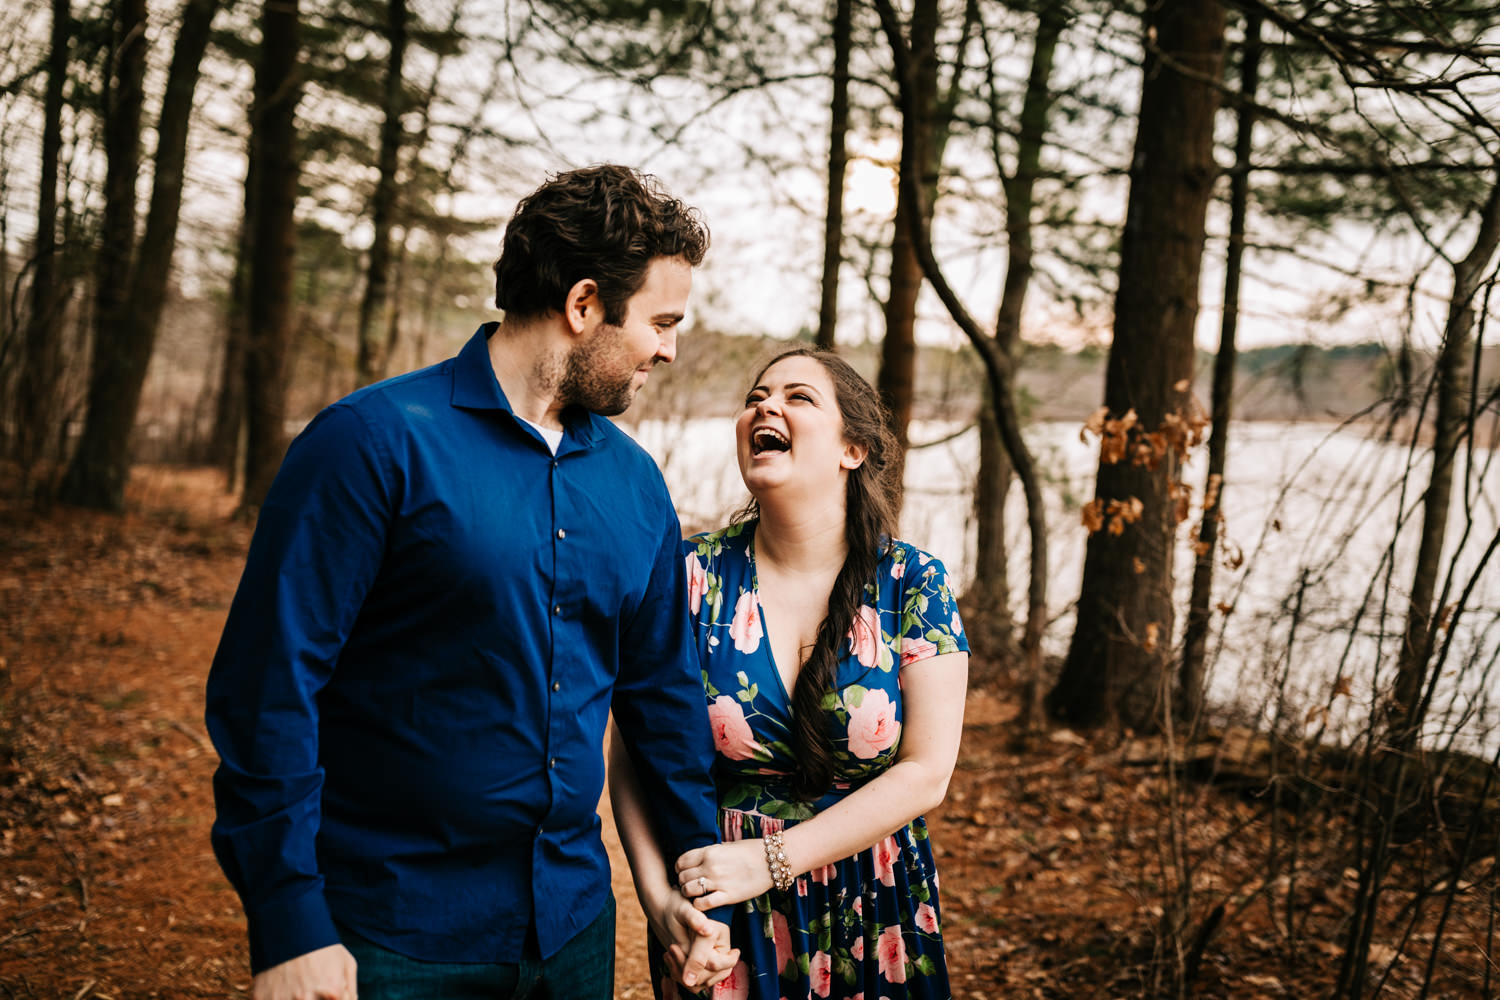 Couple laughing on hiking trail in woods of New England